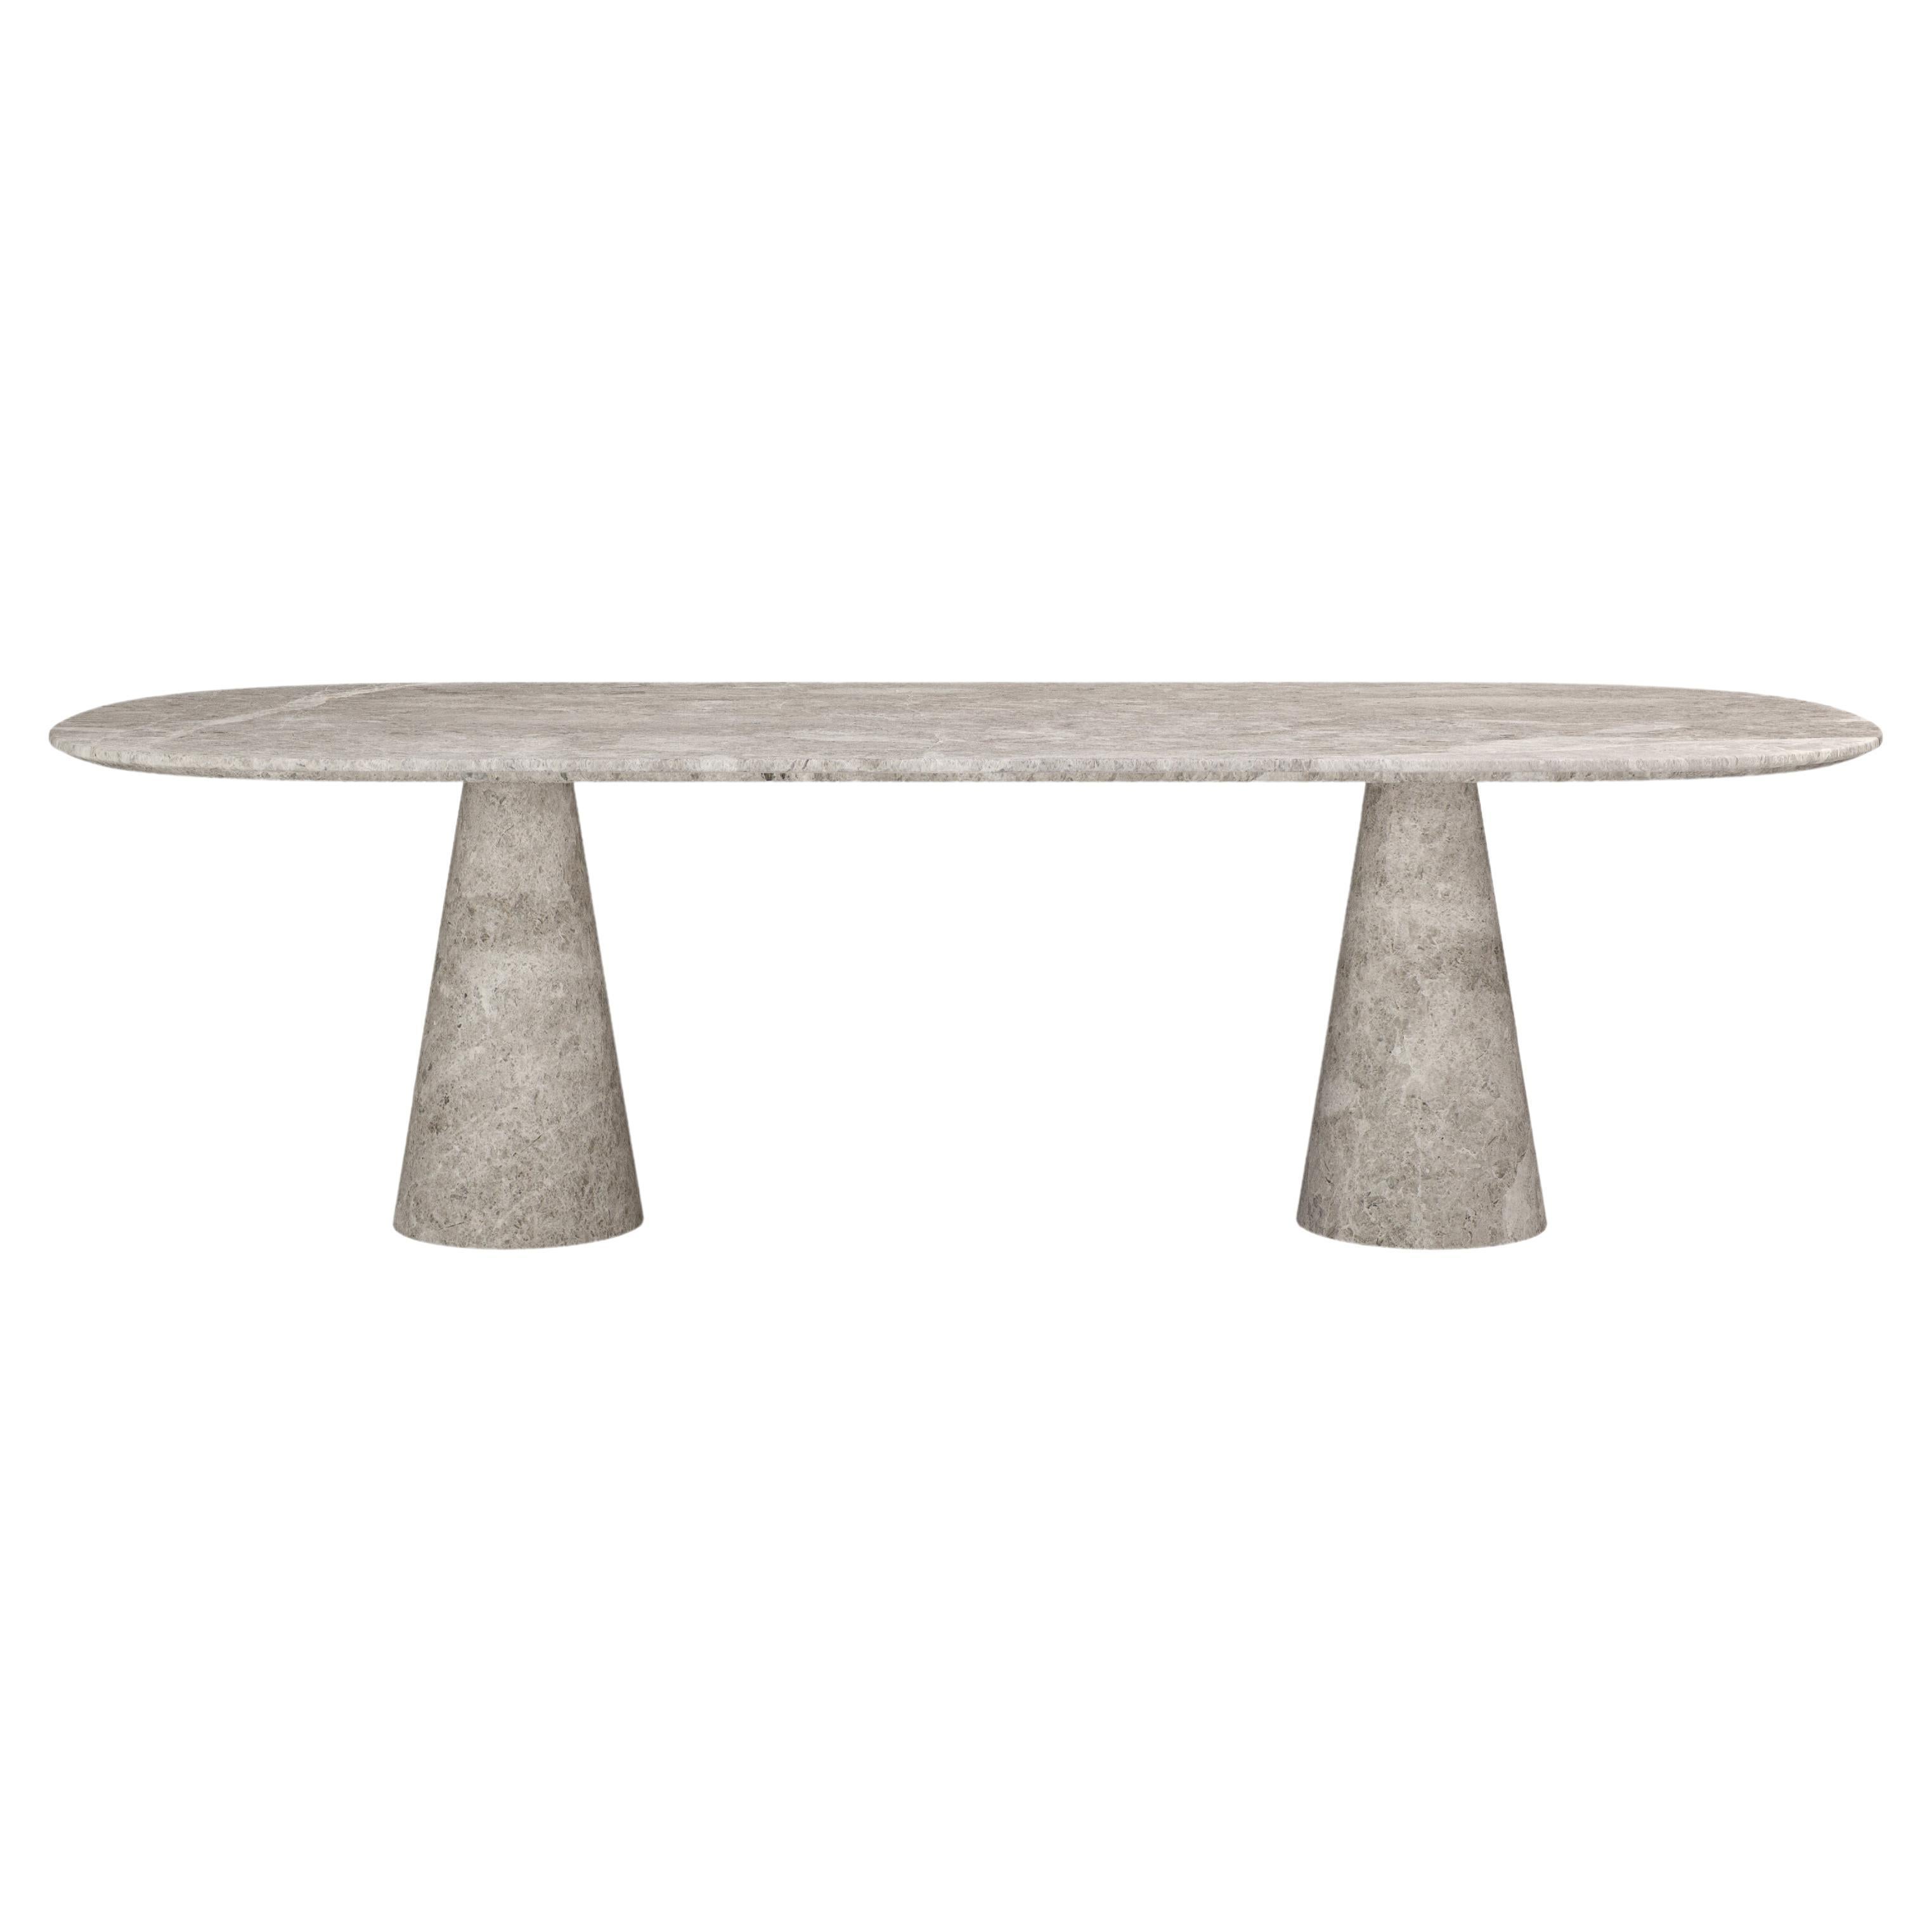 FORM(LA) Cono Oval Dining Table 84”L x 42”W x 30”H Tundra Gray Marble For Sale